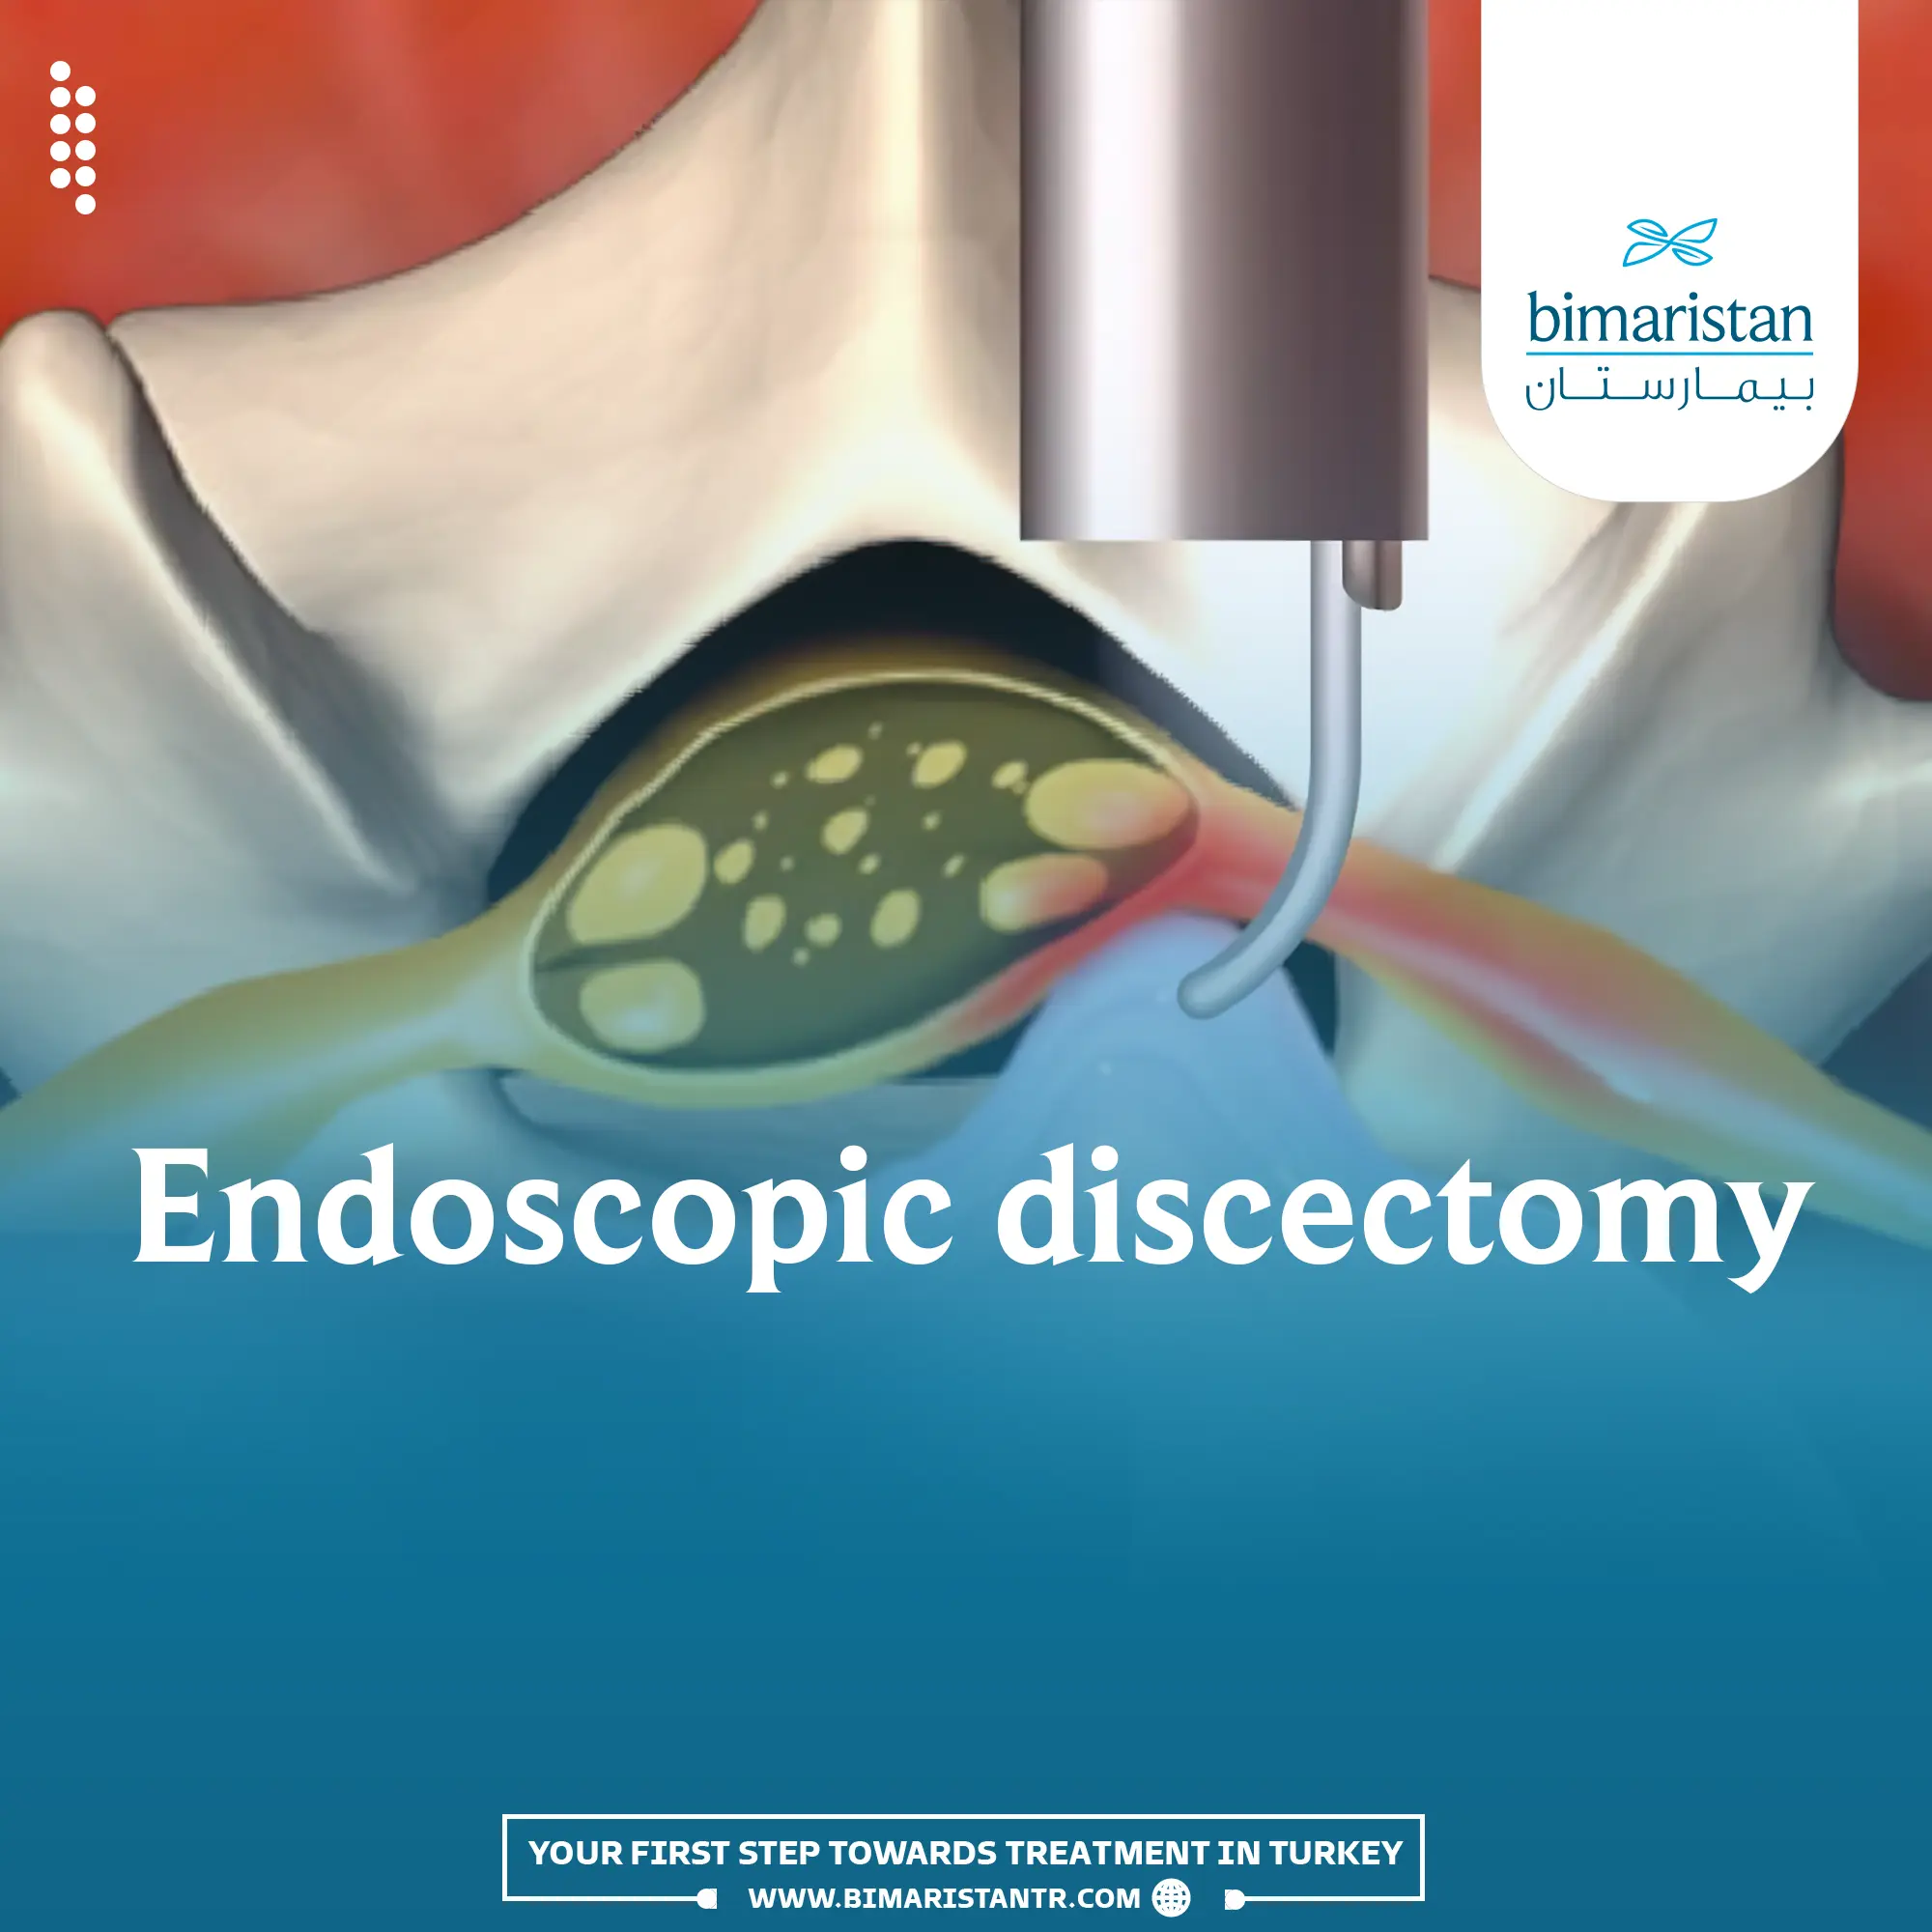 Endoscopic Discectomy and its advantages in Turkey